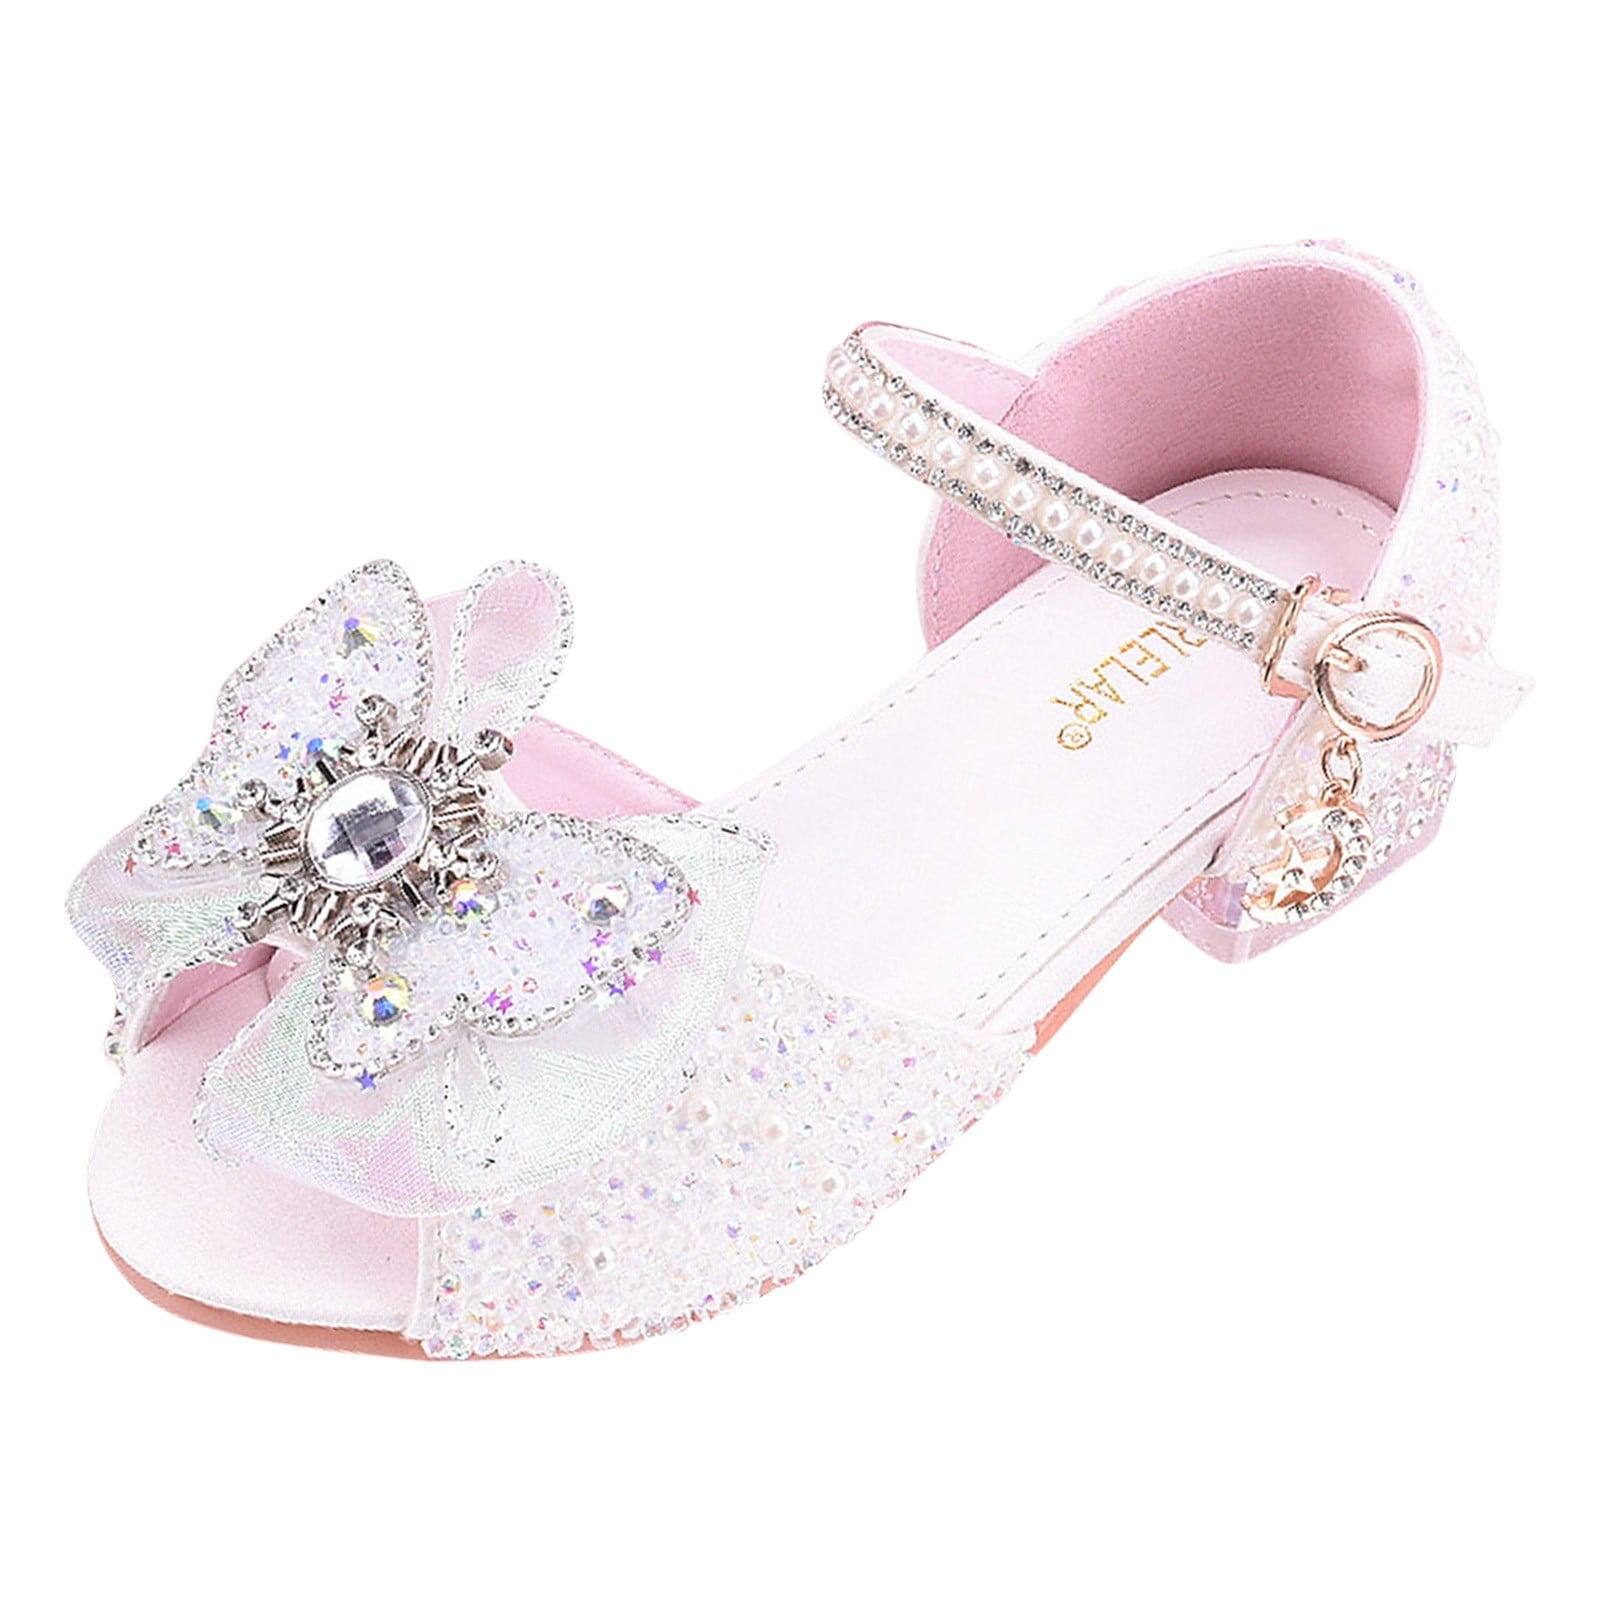 Celiean New Girl Sandals Bow Shoes Little Girl Crystal Shoes Girl Dress ...